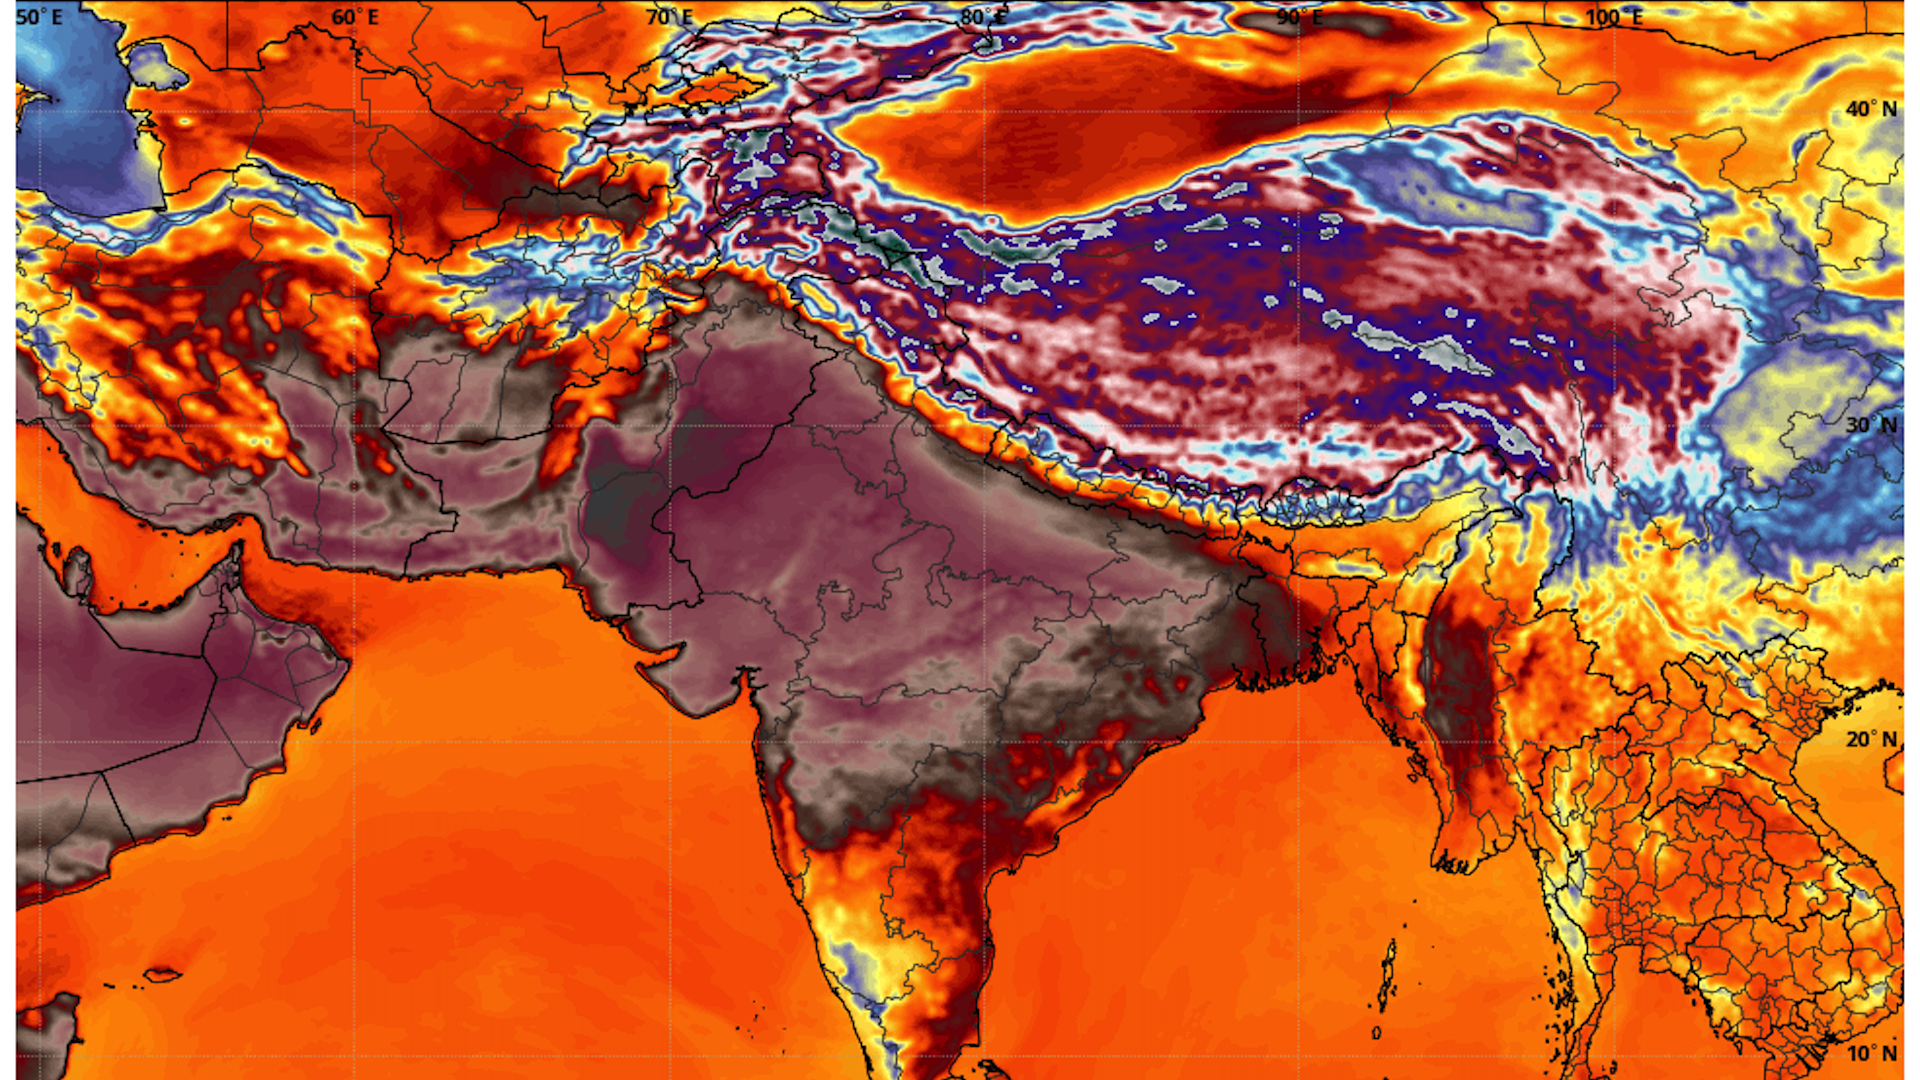 Computer model depiction of high temperatures on May 19, 2022.